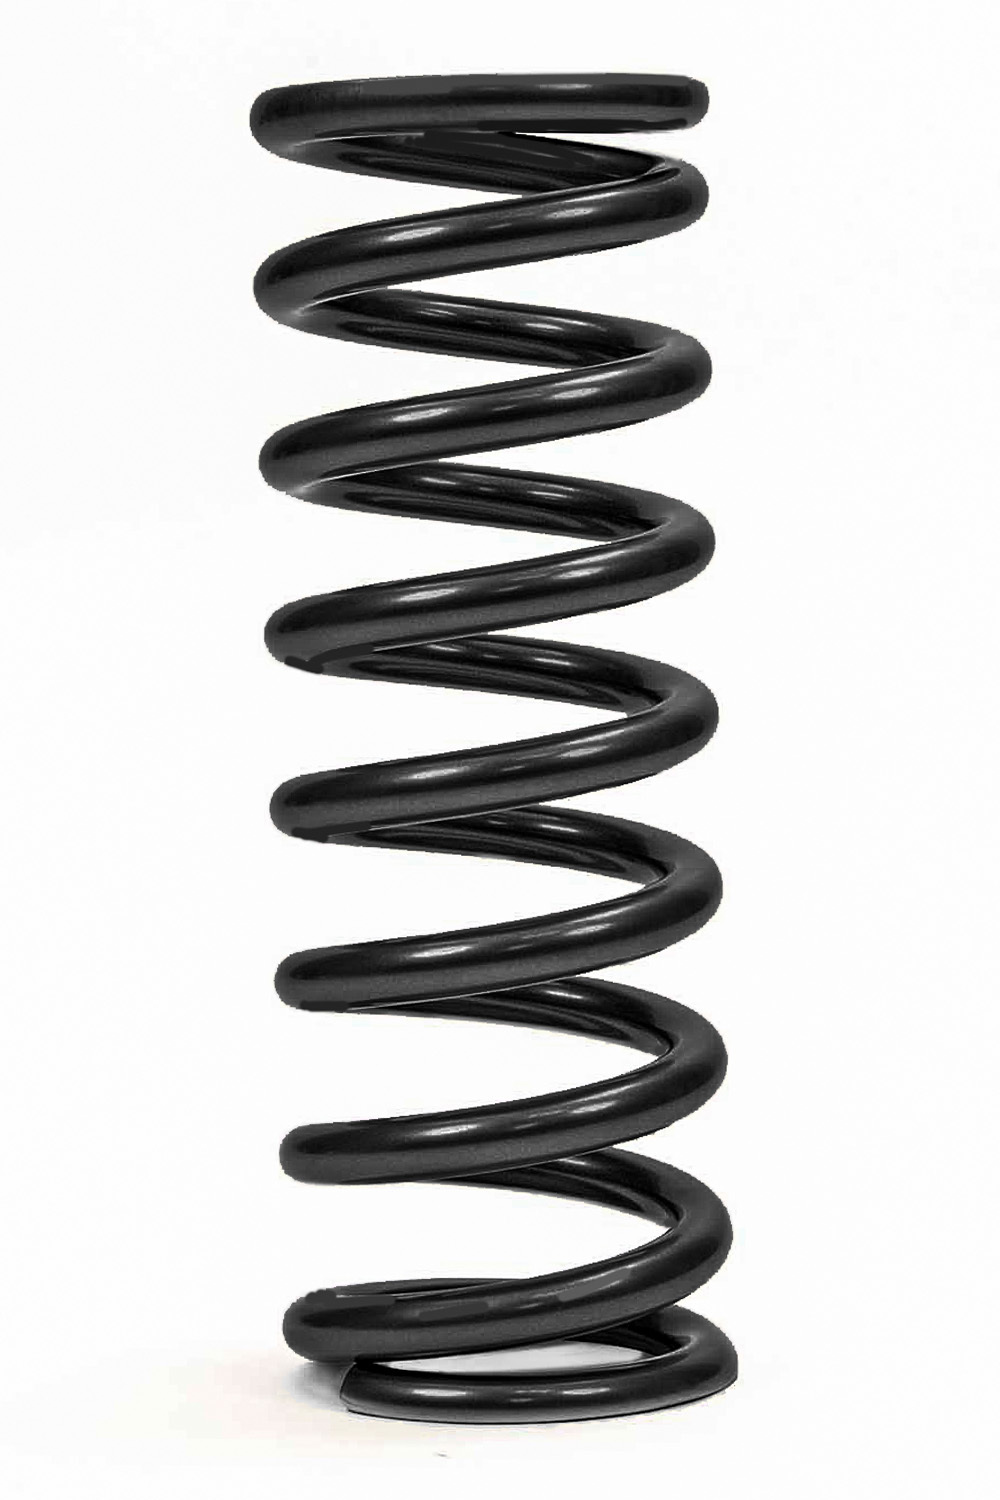 QA1 10HT150B Coil Spring, Coil-Over, 2.500 in ID, 10.000 in Length, 150 lb/in Spring Rate, Steel, Black Powder Coat, Each